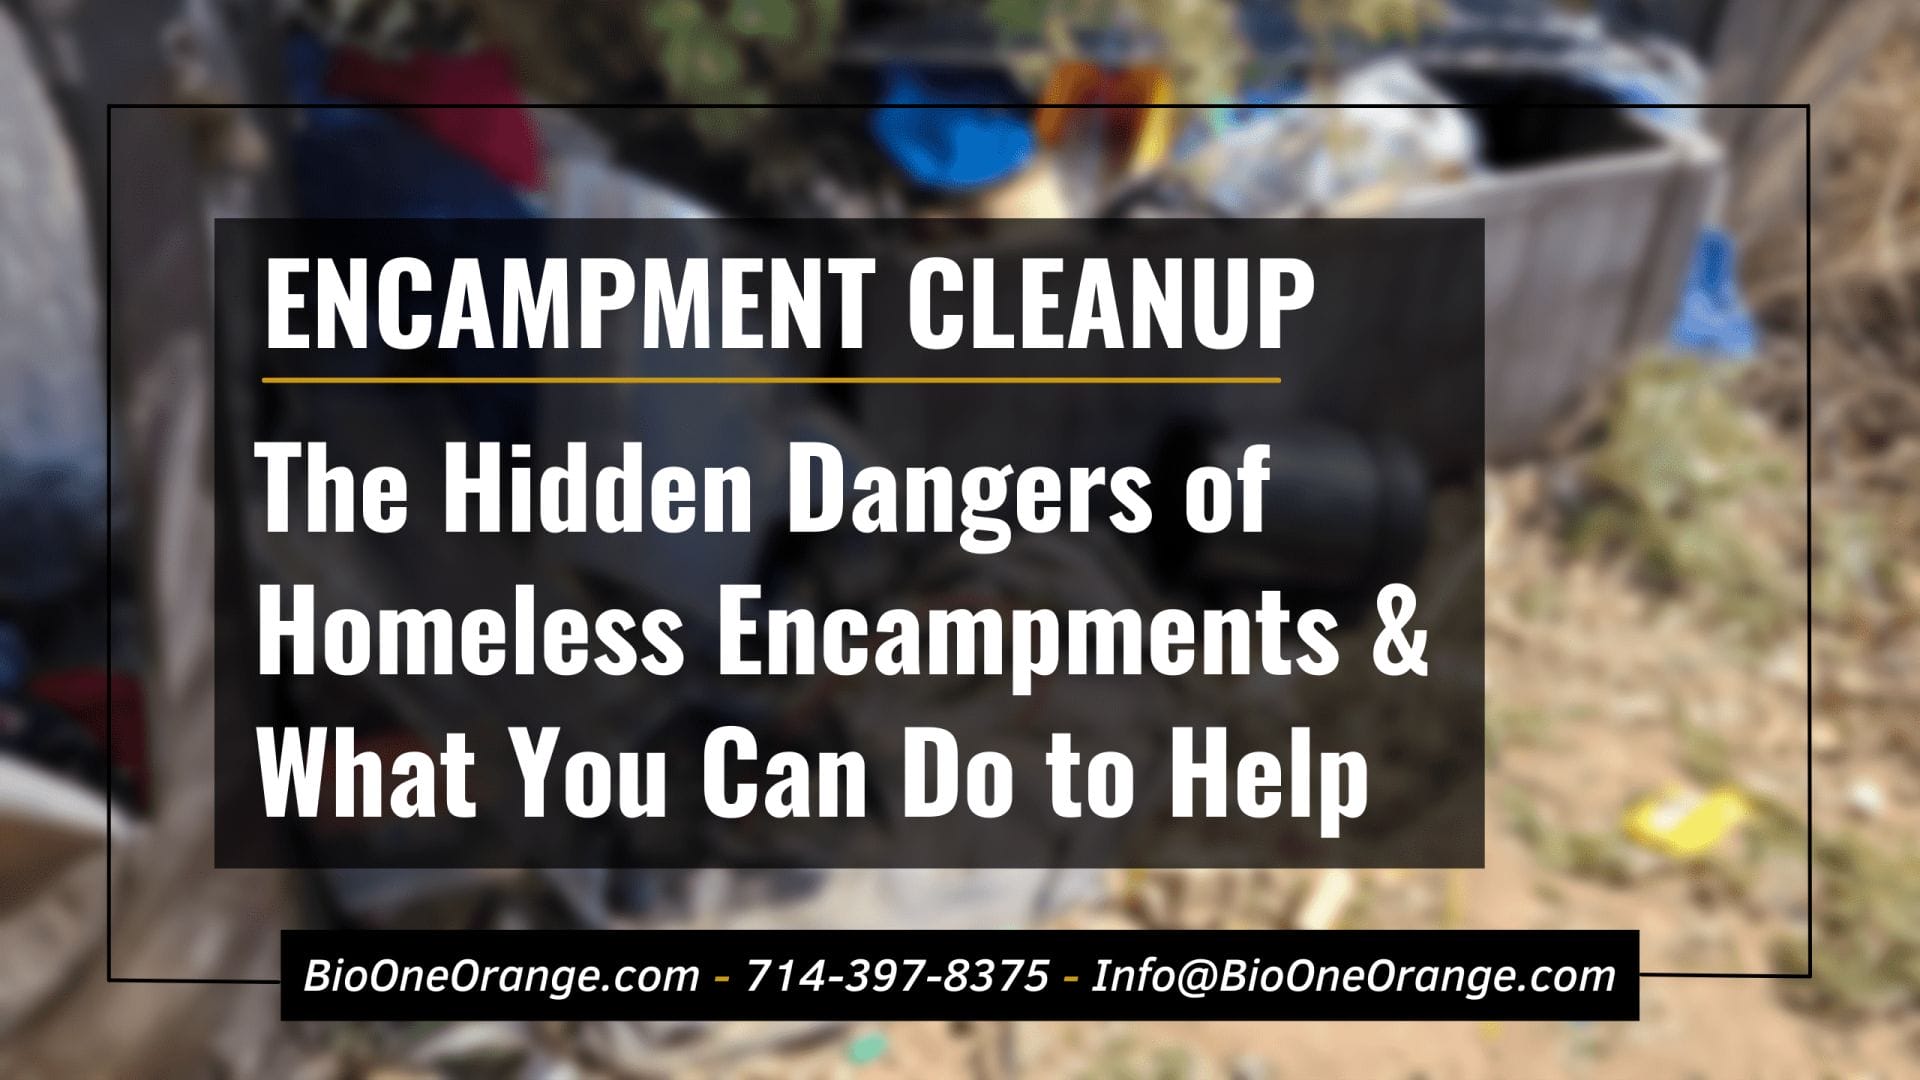 The Hidden Dangers of Homeless Encampments & What You Can Do to Help